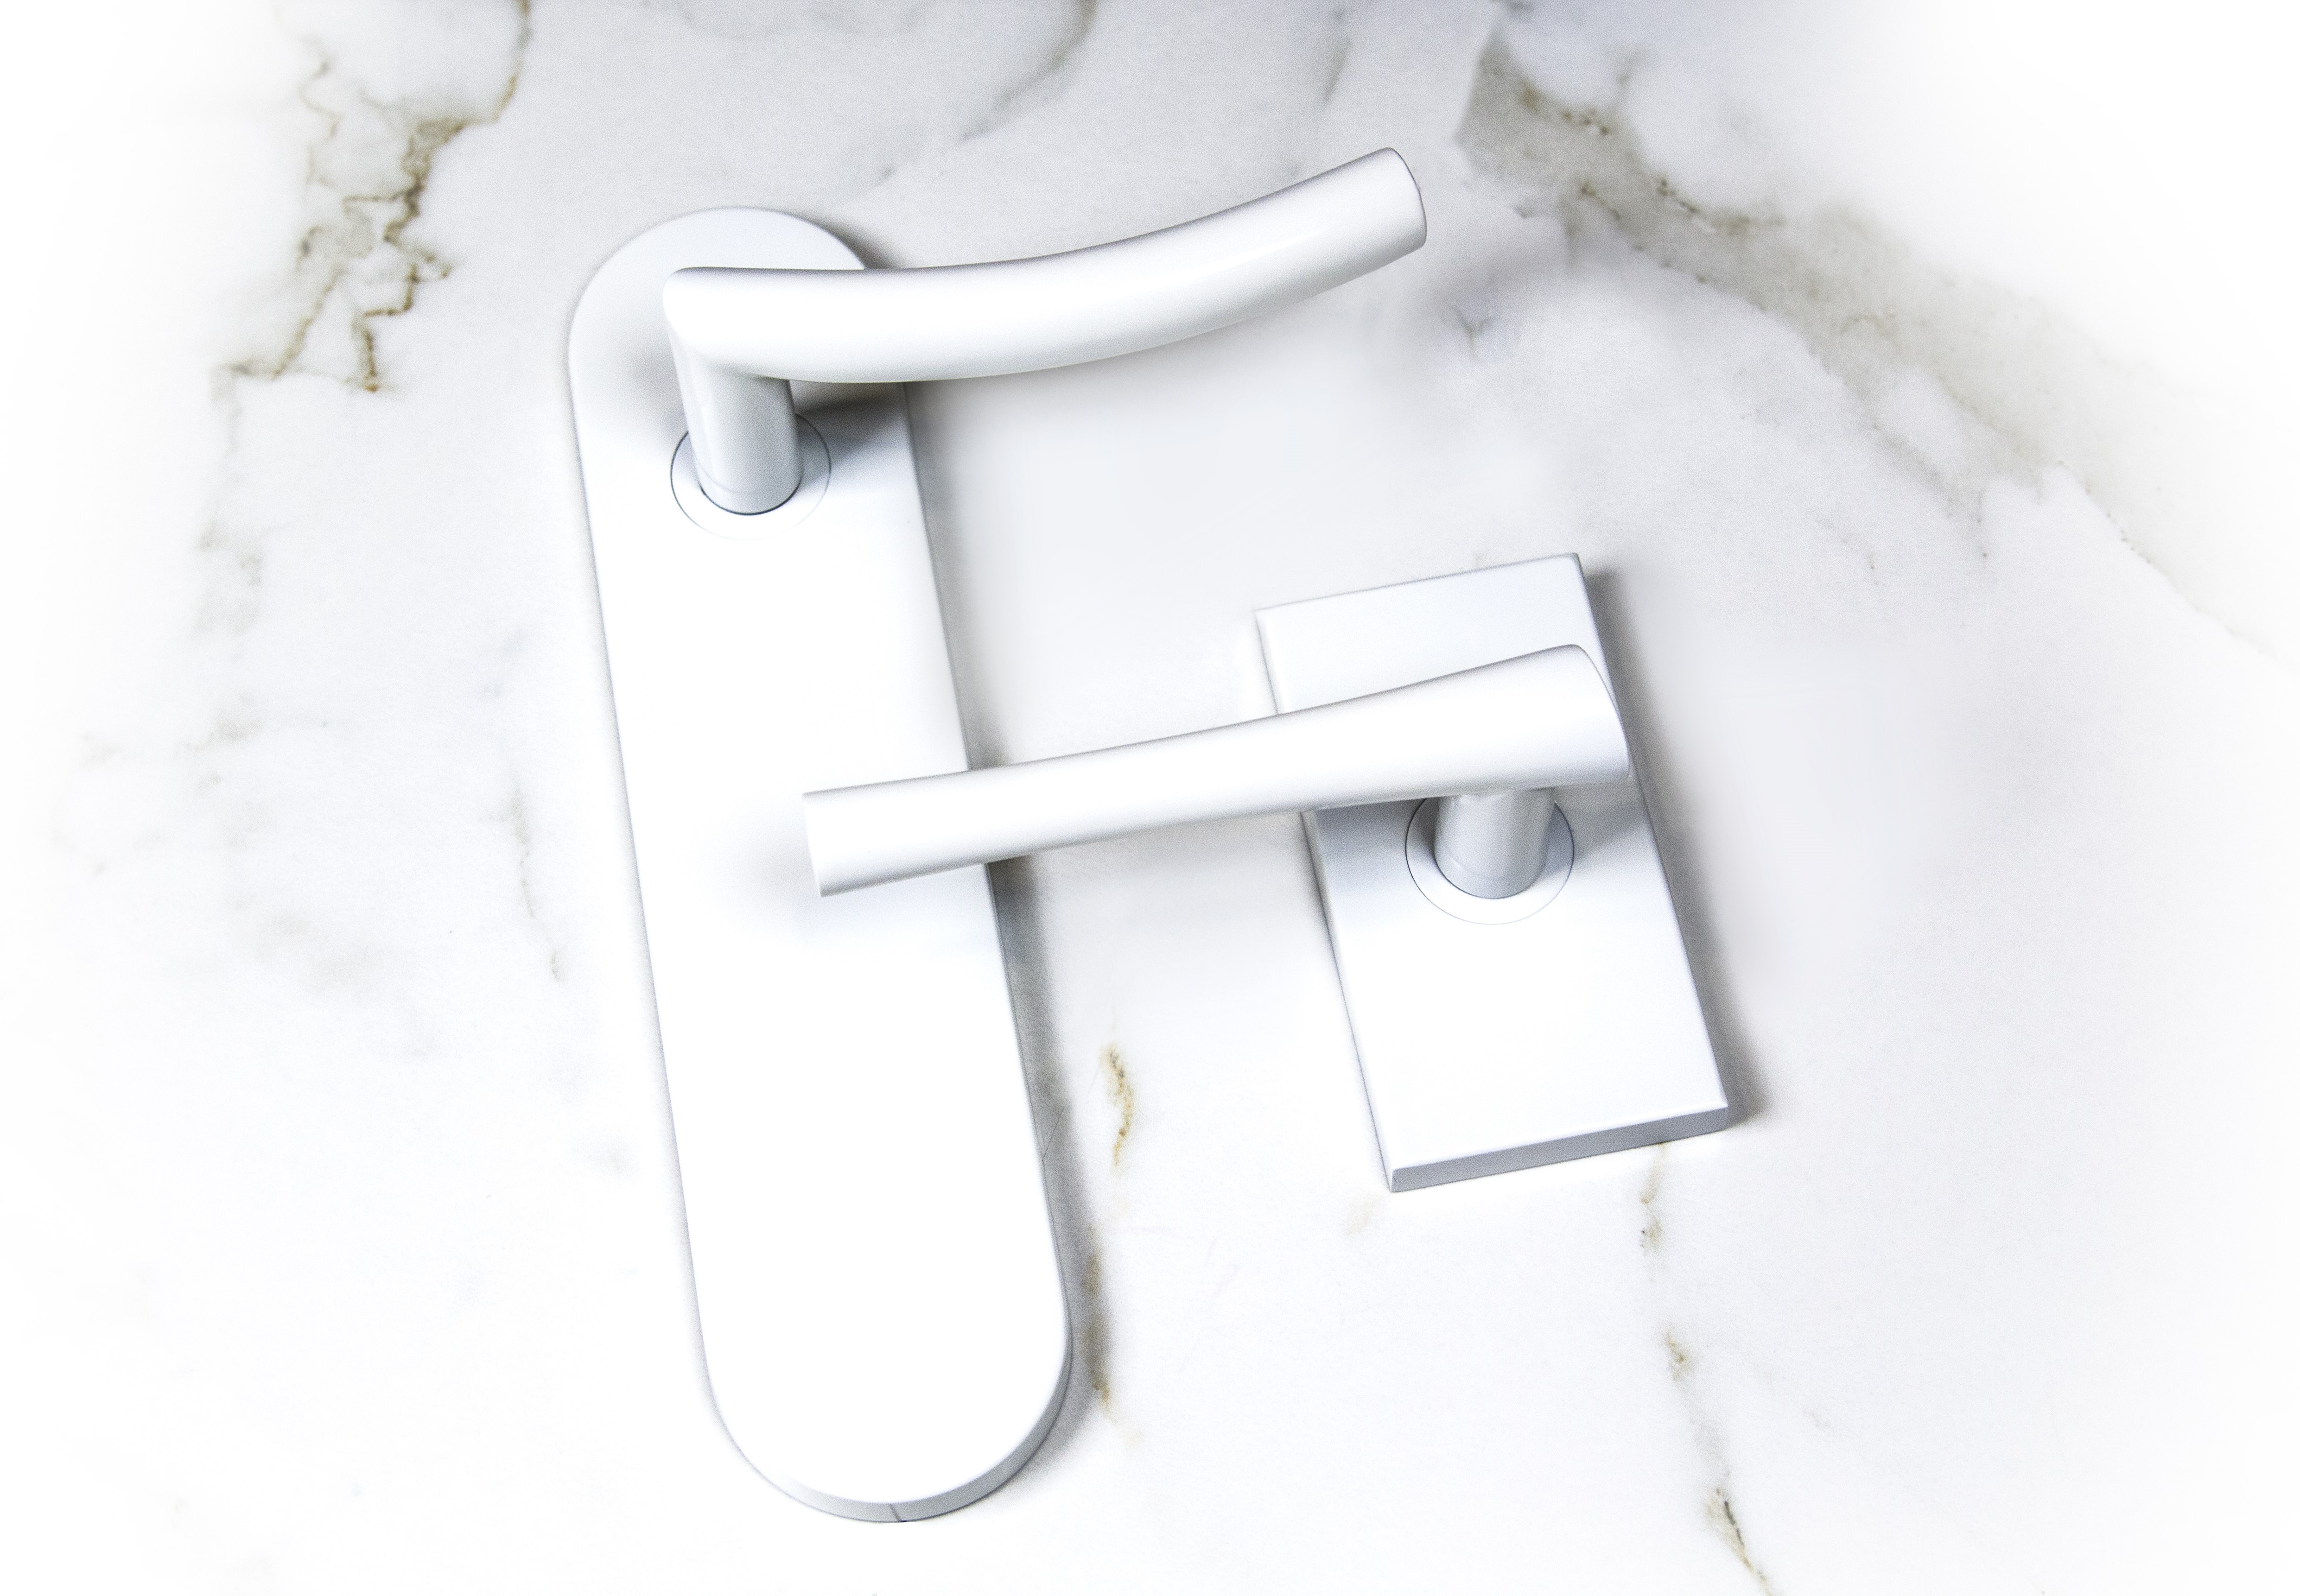 INOX debuts CeraMax—a line of ceramic coated door hardware for designers, architects and homeowners looking for a finish option that ensures longevity and corrosion-resistance. Shown in Glacier White.